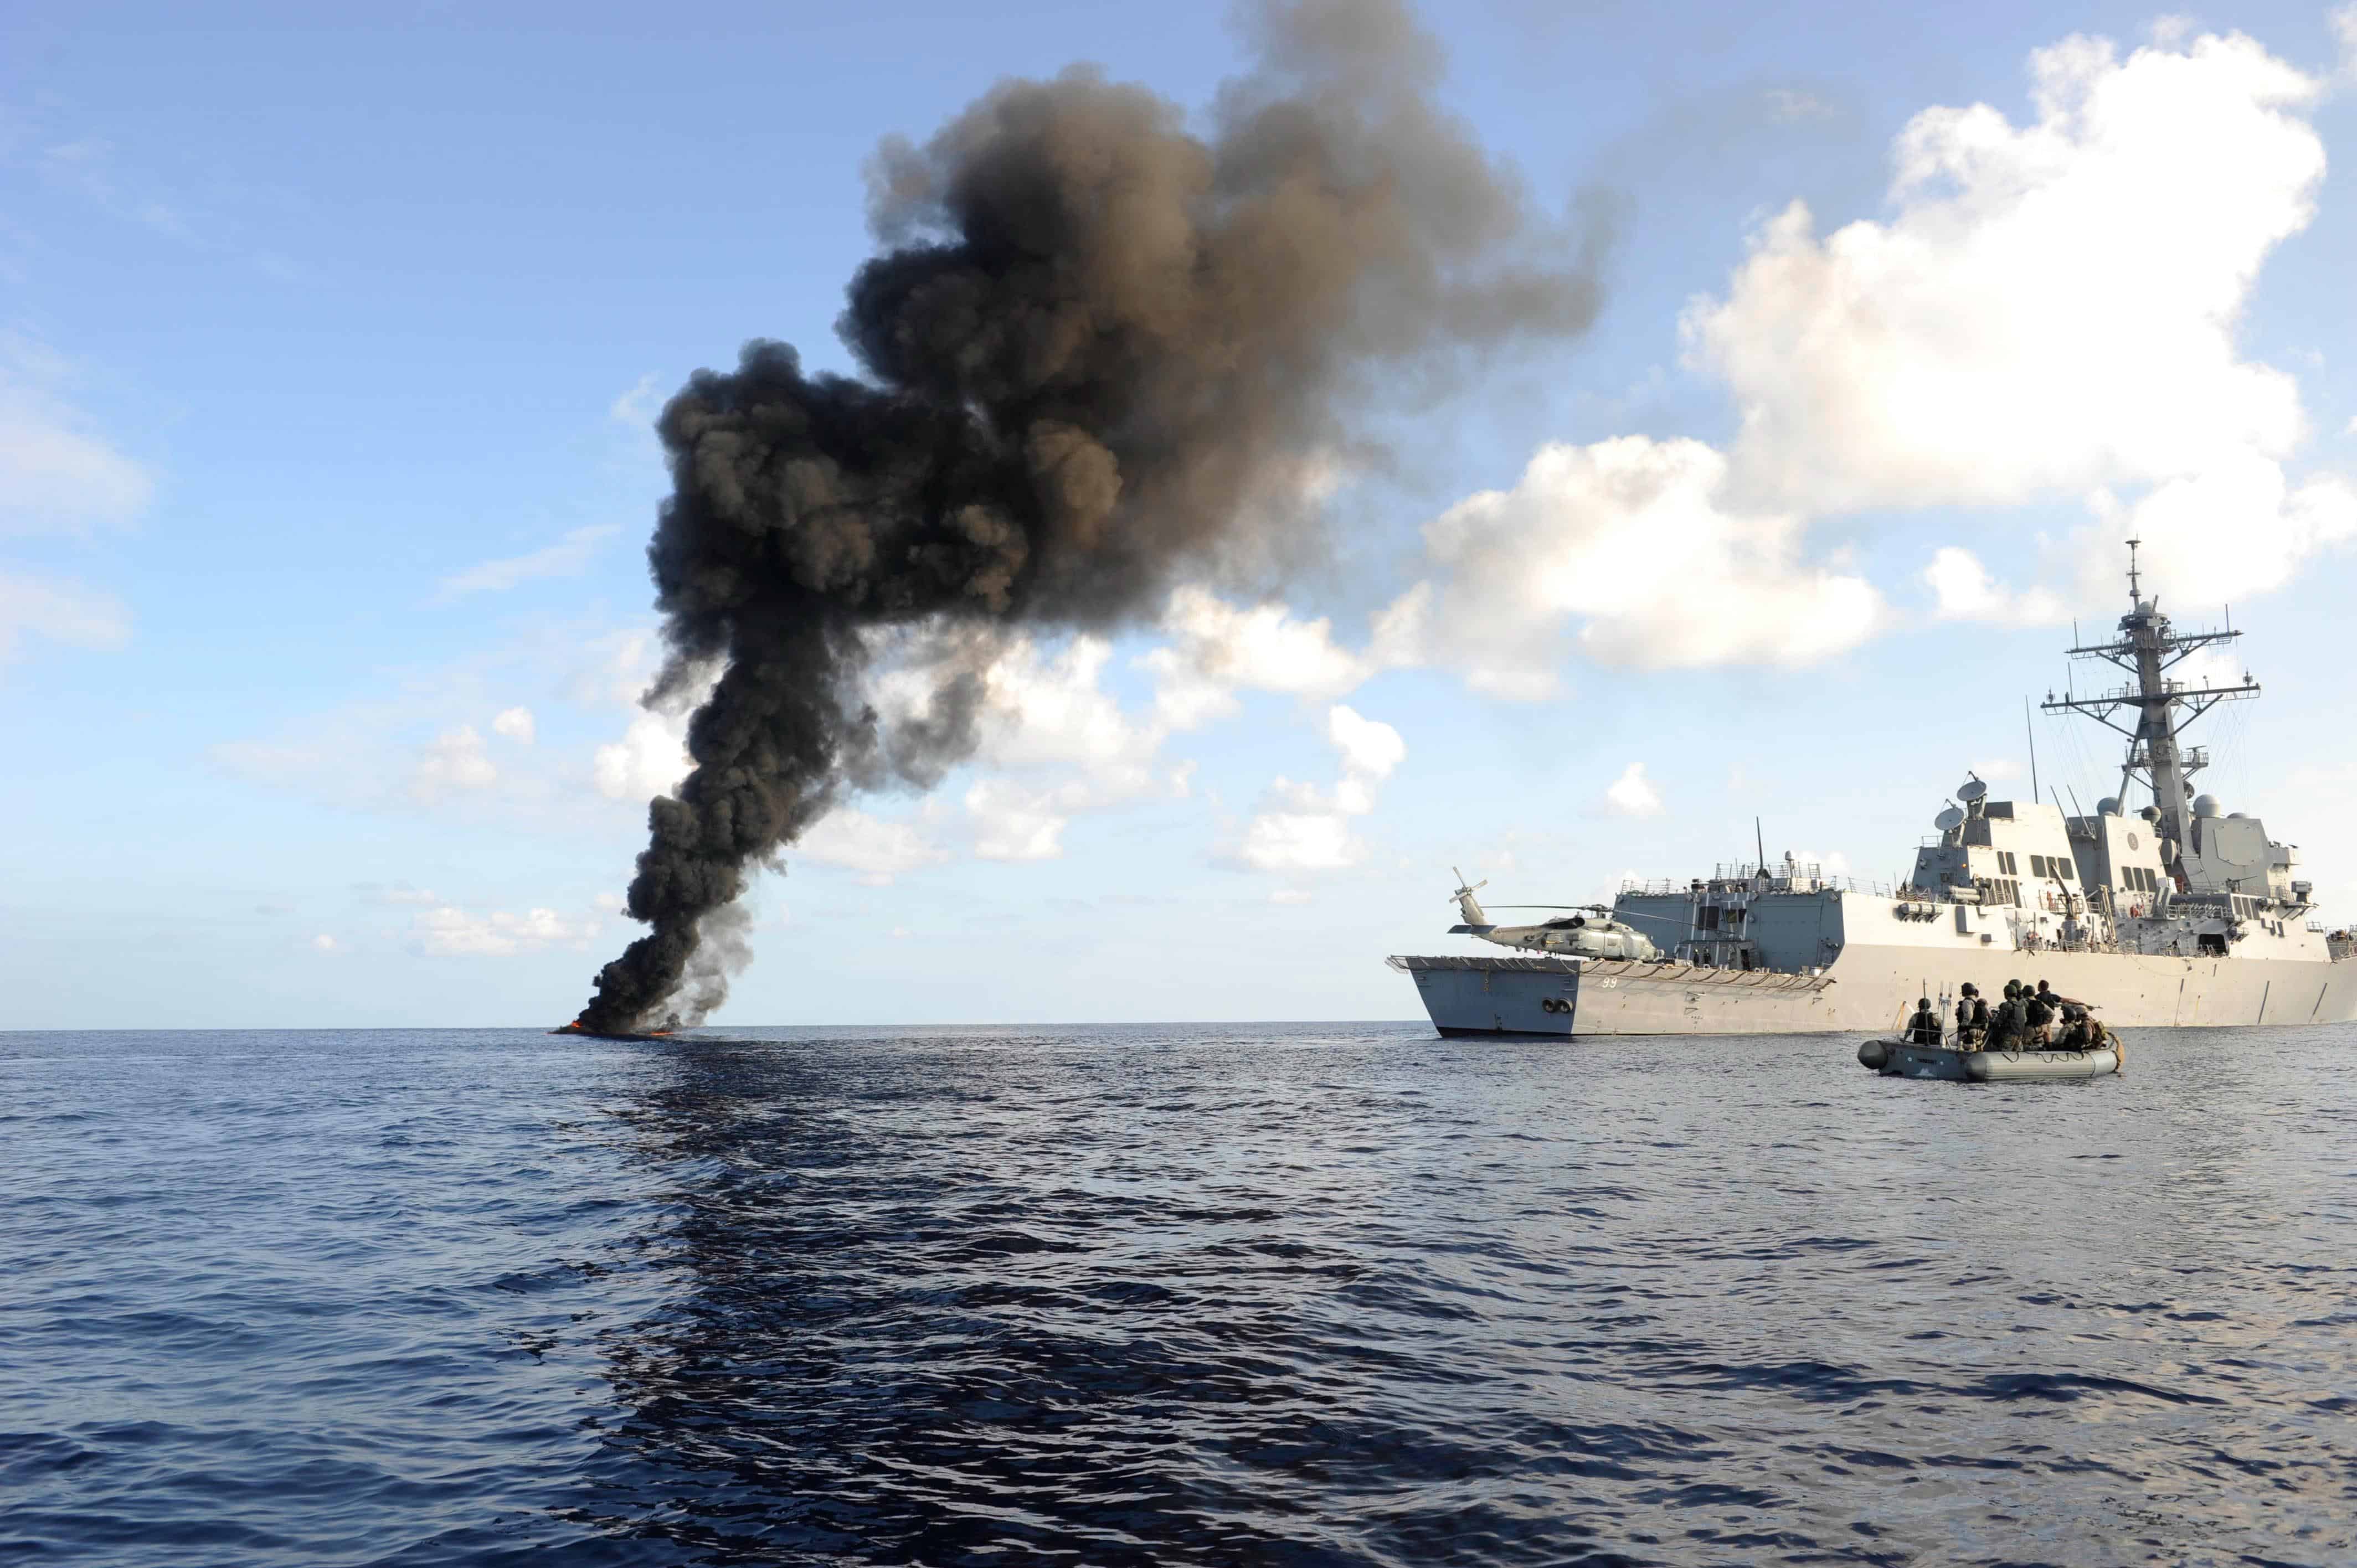 The Arleigh Burke-class guided missile destroyer USS Farragut passes by the smoke from a suspected pirate skiff it had just disabled. USS Farragut is part of Combined Task Force 151, a multinational task force established to conduct anti-piracy operations in the Gulf of Aden. (Photo by: Petty Officer 1st Class Cassandra Thompson)